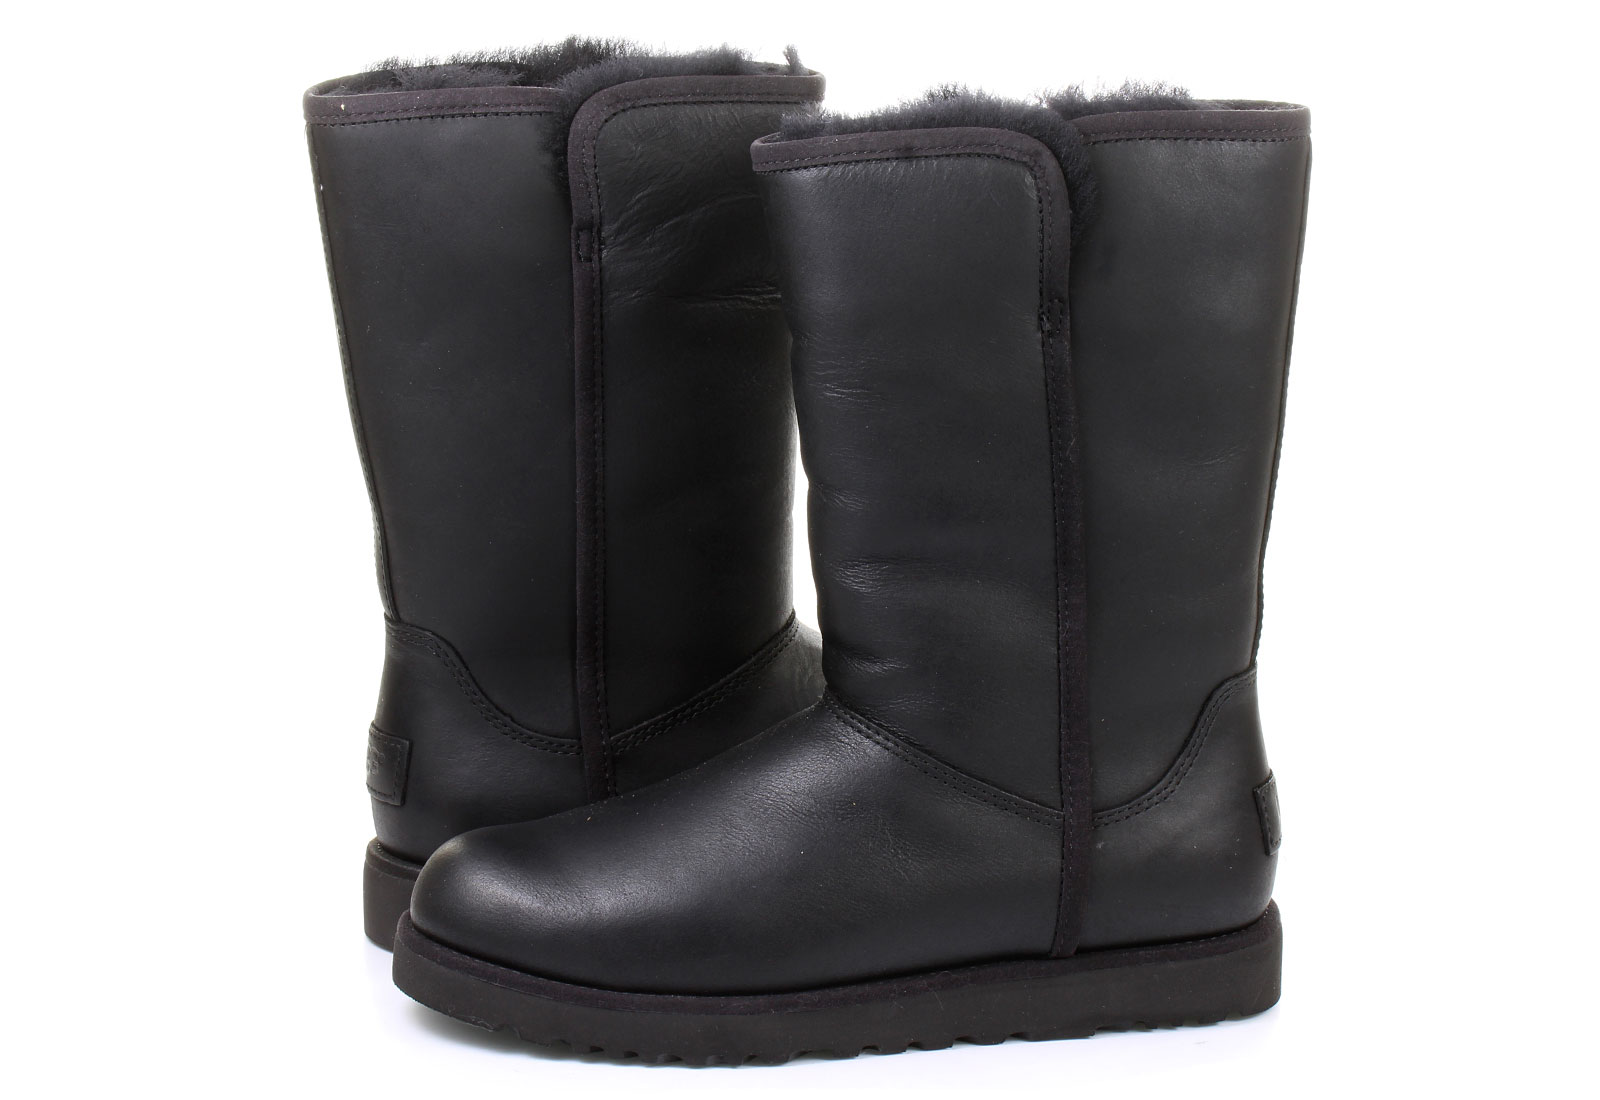 compact abces dinsdag UGG Boots - Michelle Leather - 1014440-blk - Online shop for sneakers,  shoes and boots